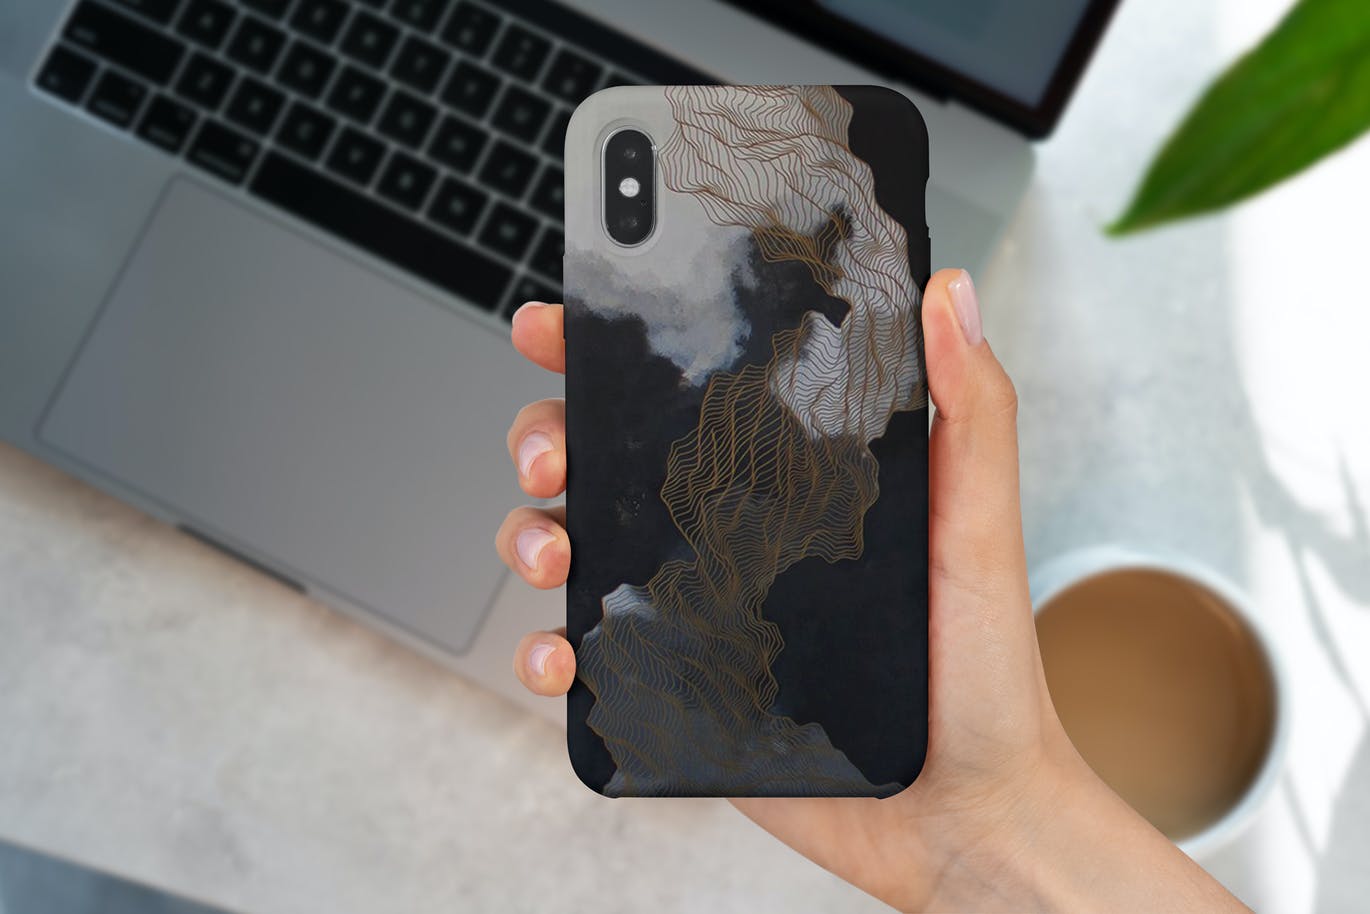 iPhone Case in Hand Mockup